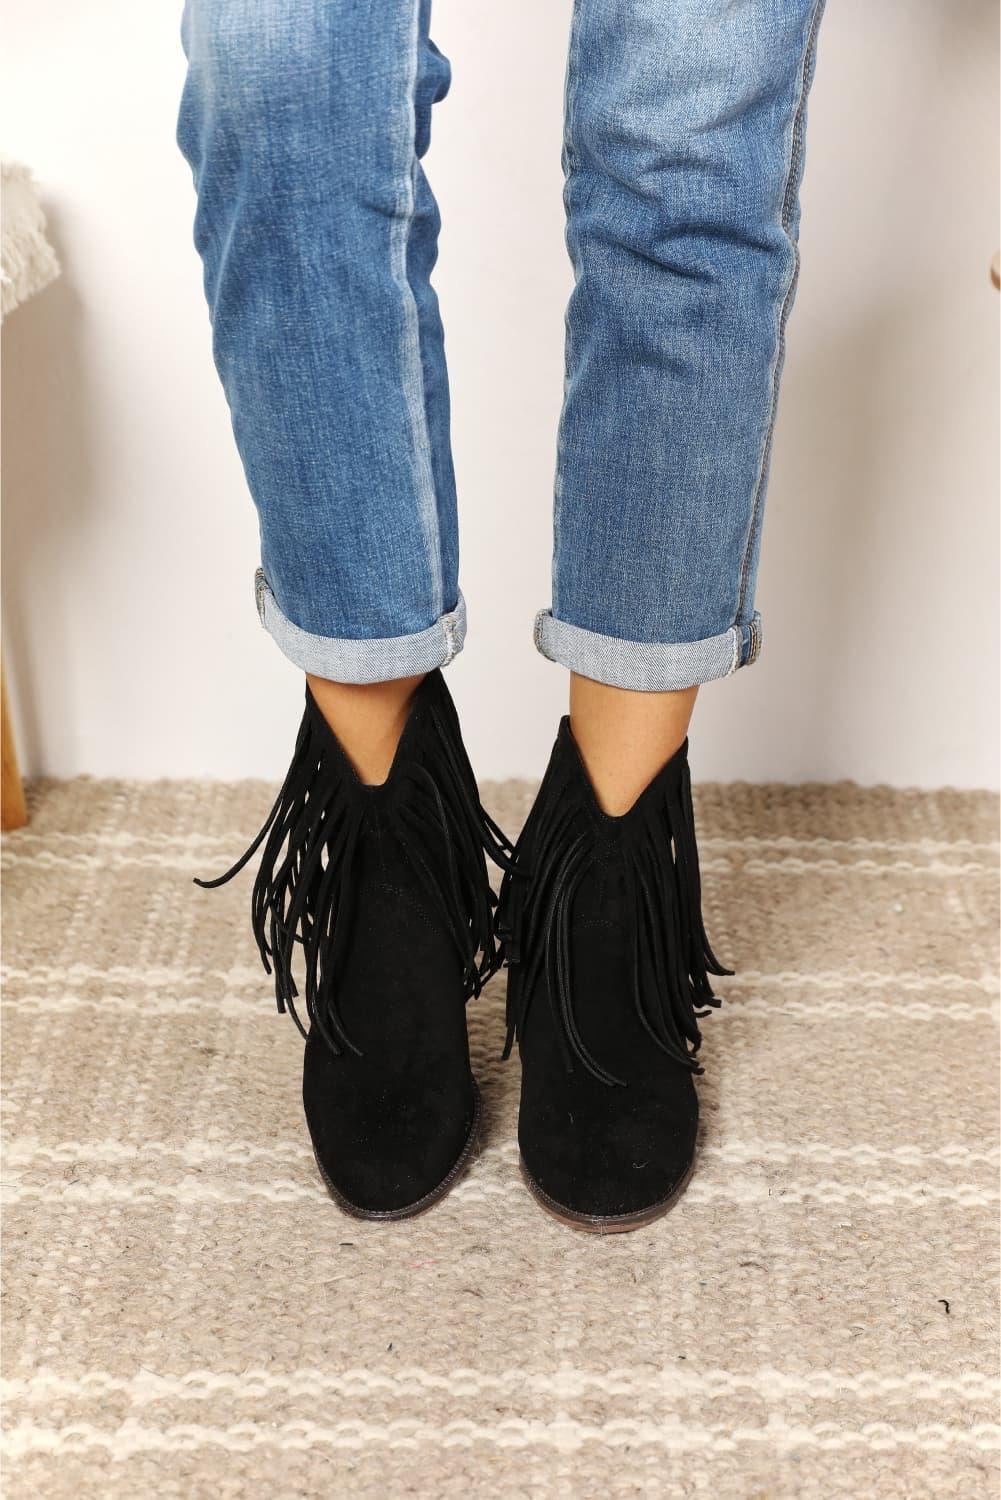 Fringe Ankle Booties - Black - Inspired Eye Boutique